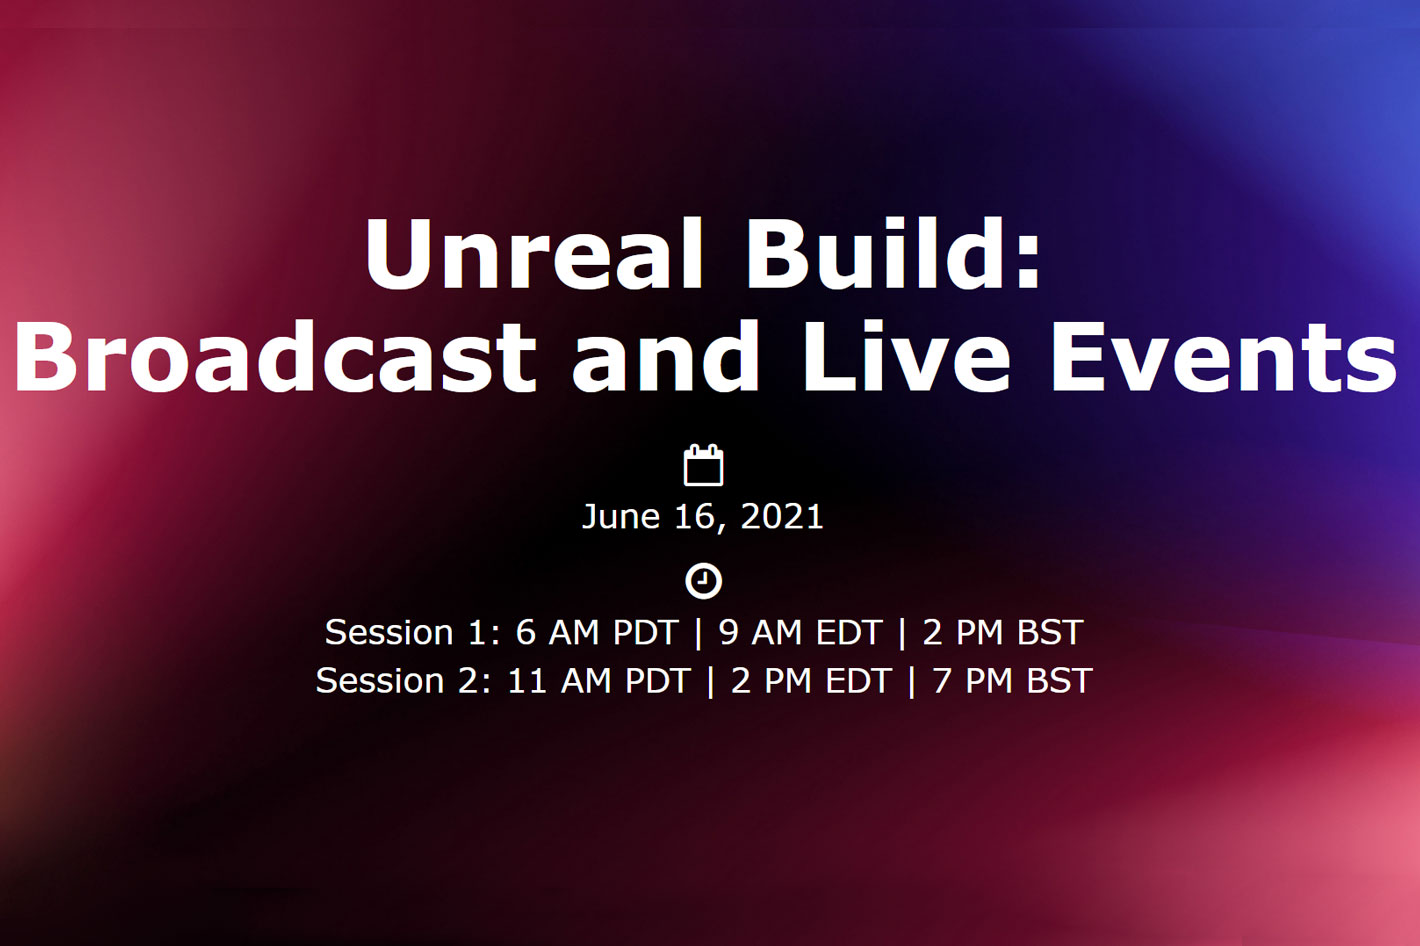 Unreal Build: Broadcast & Live Events, a free virtual event on June 16th